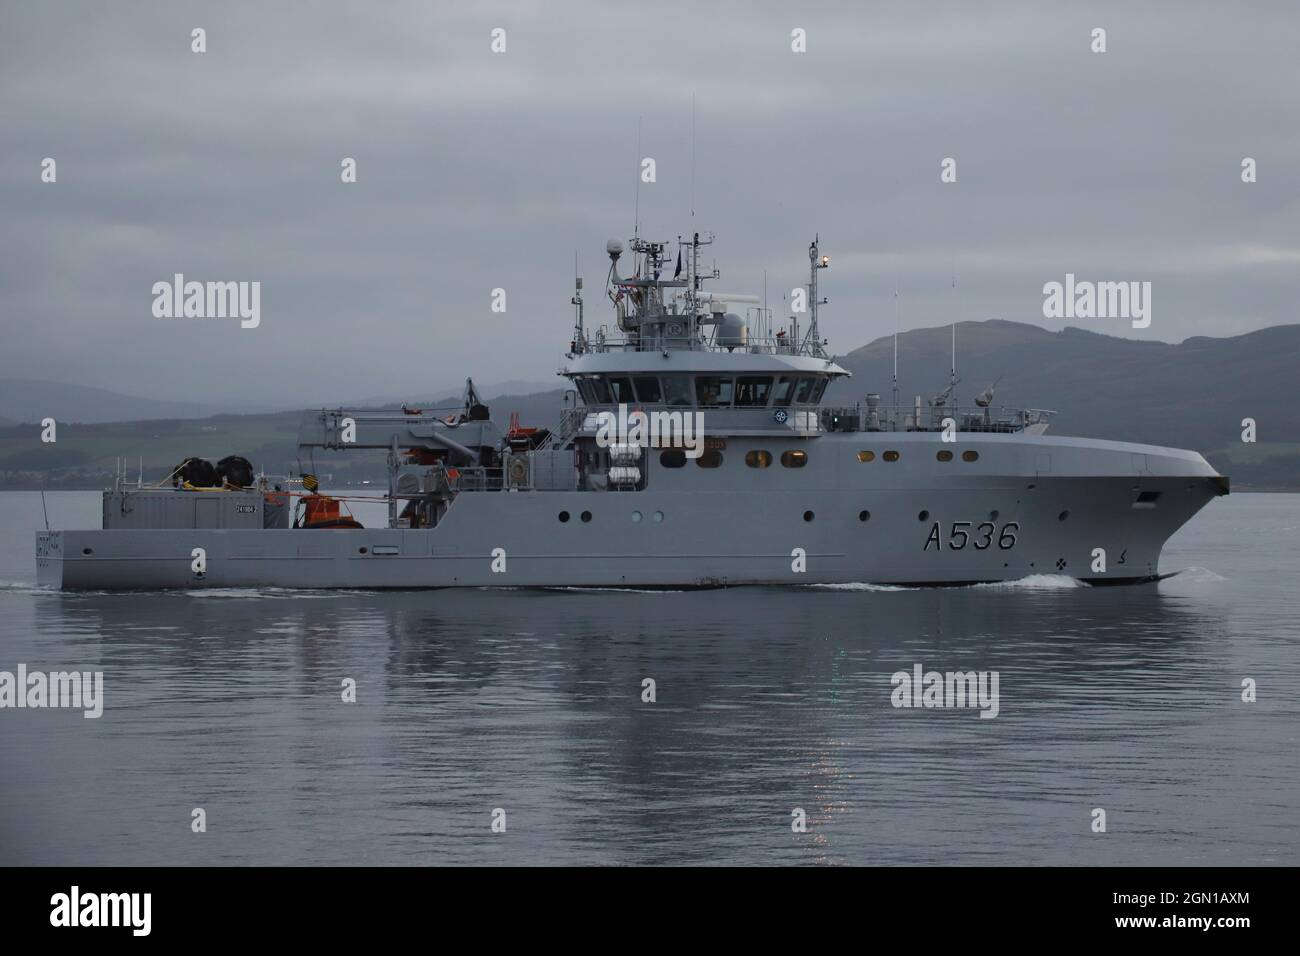 KNM Olav Tryggvason (A536), a Reine-class patrol vessel operated by the Royal Norwegian Navy, passing Greenock on the Firth of Clyde, prior to participating in the military exercises Dynamic Mariner 2021 and Joint Warrior 21-2. Stock Photo